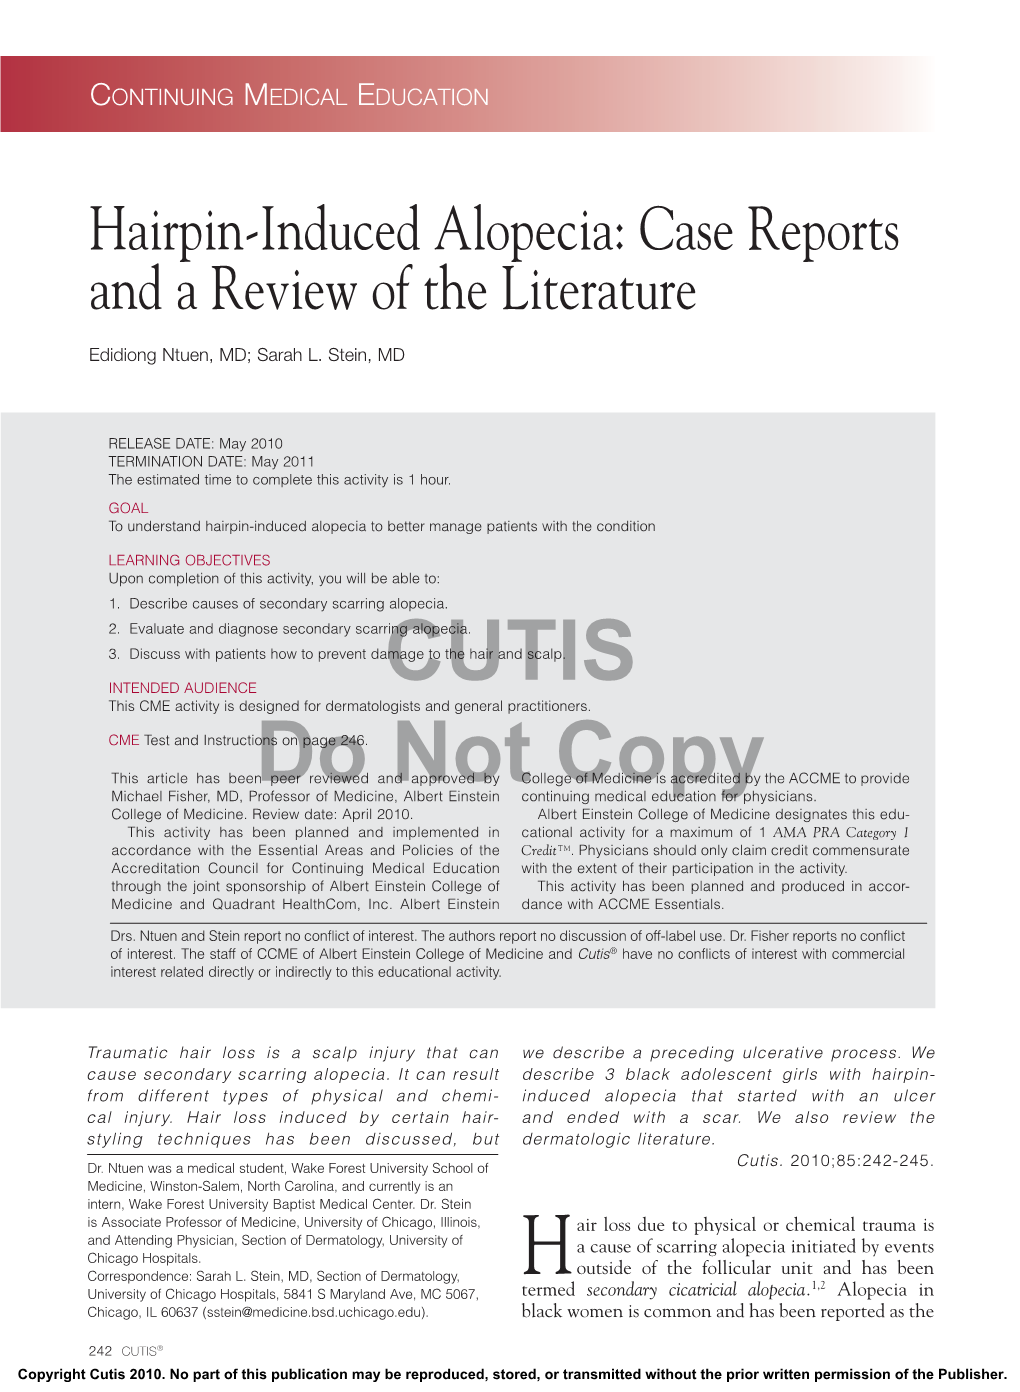 Hairpin-Induced Alopecia: Case Reports and a Review of the Literature